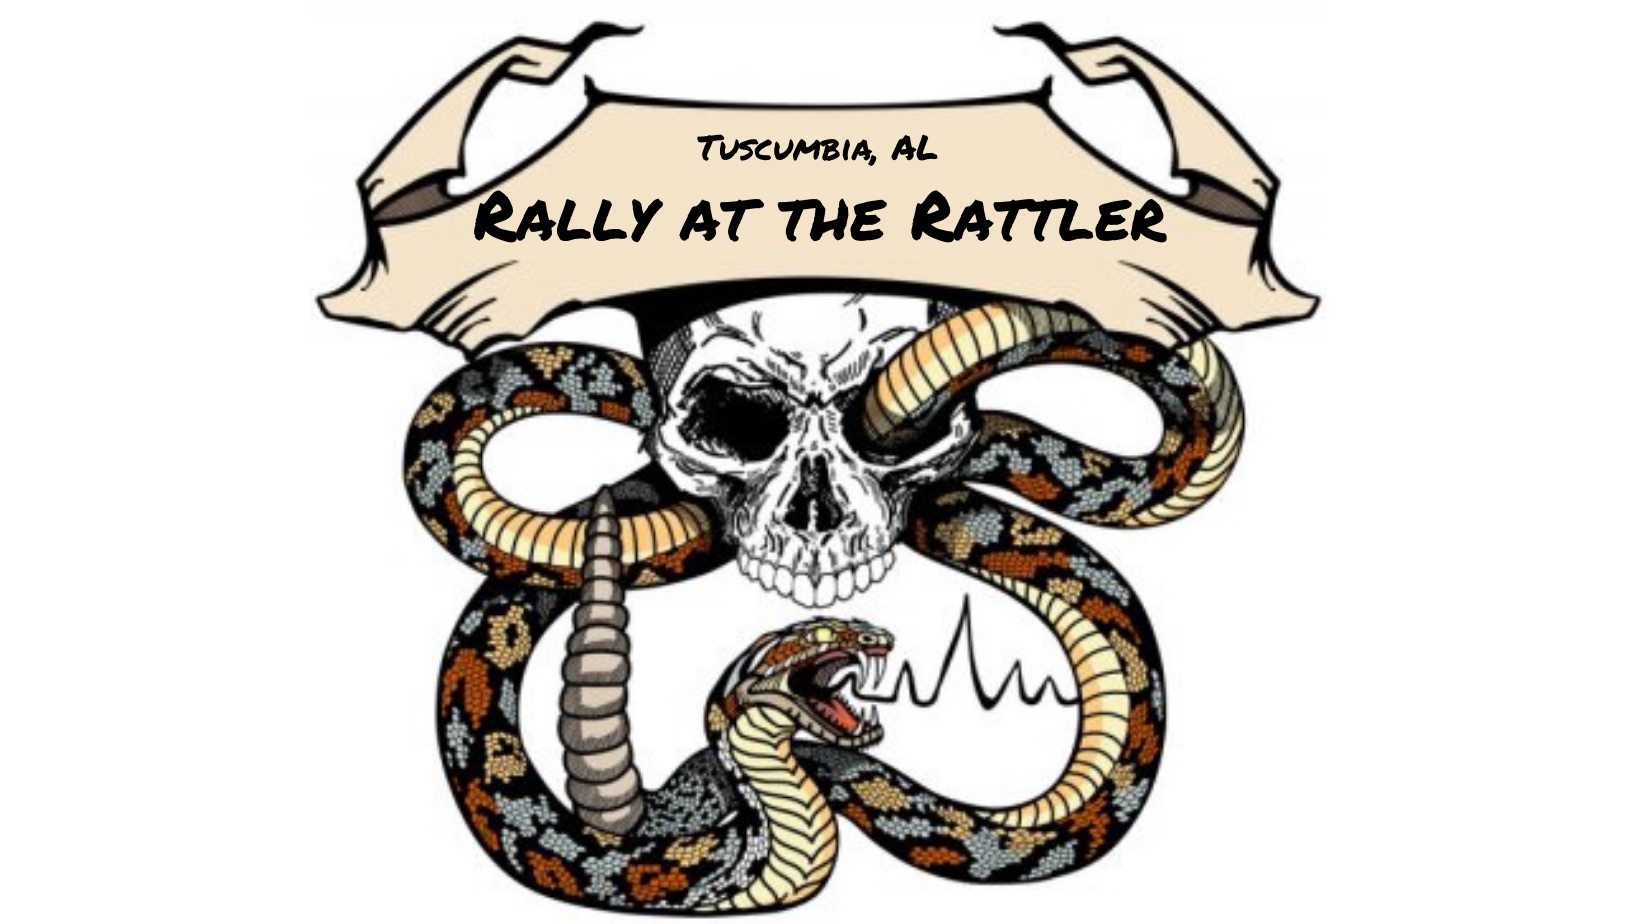 Rally at the Rattler 21+ motorcycle rally in the heart of beautiful Northwest Alabama